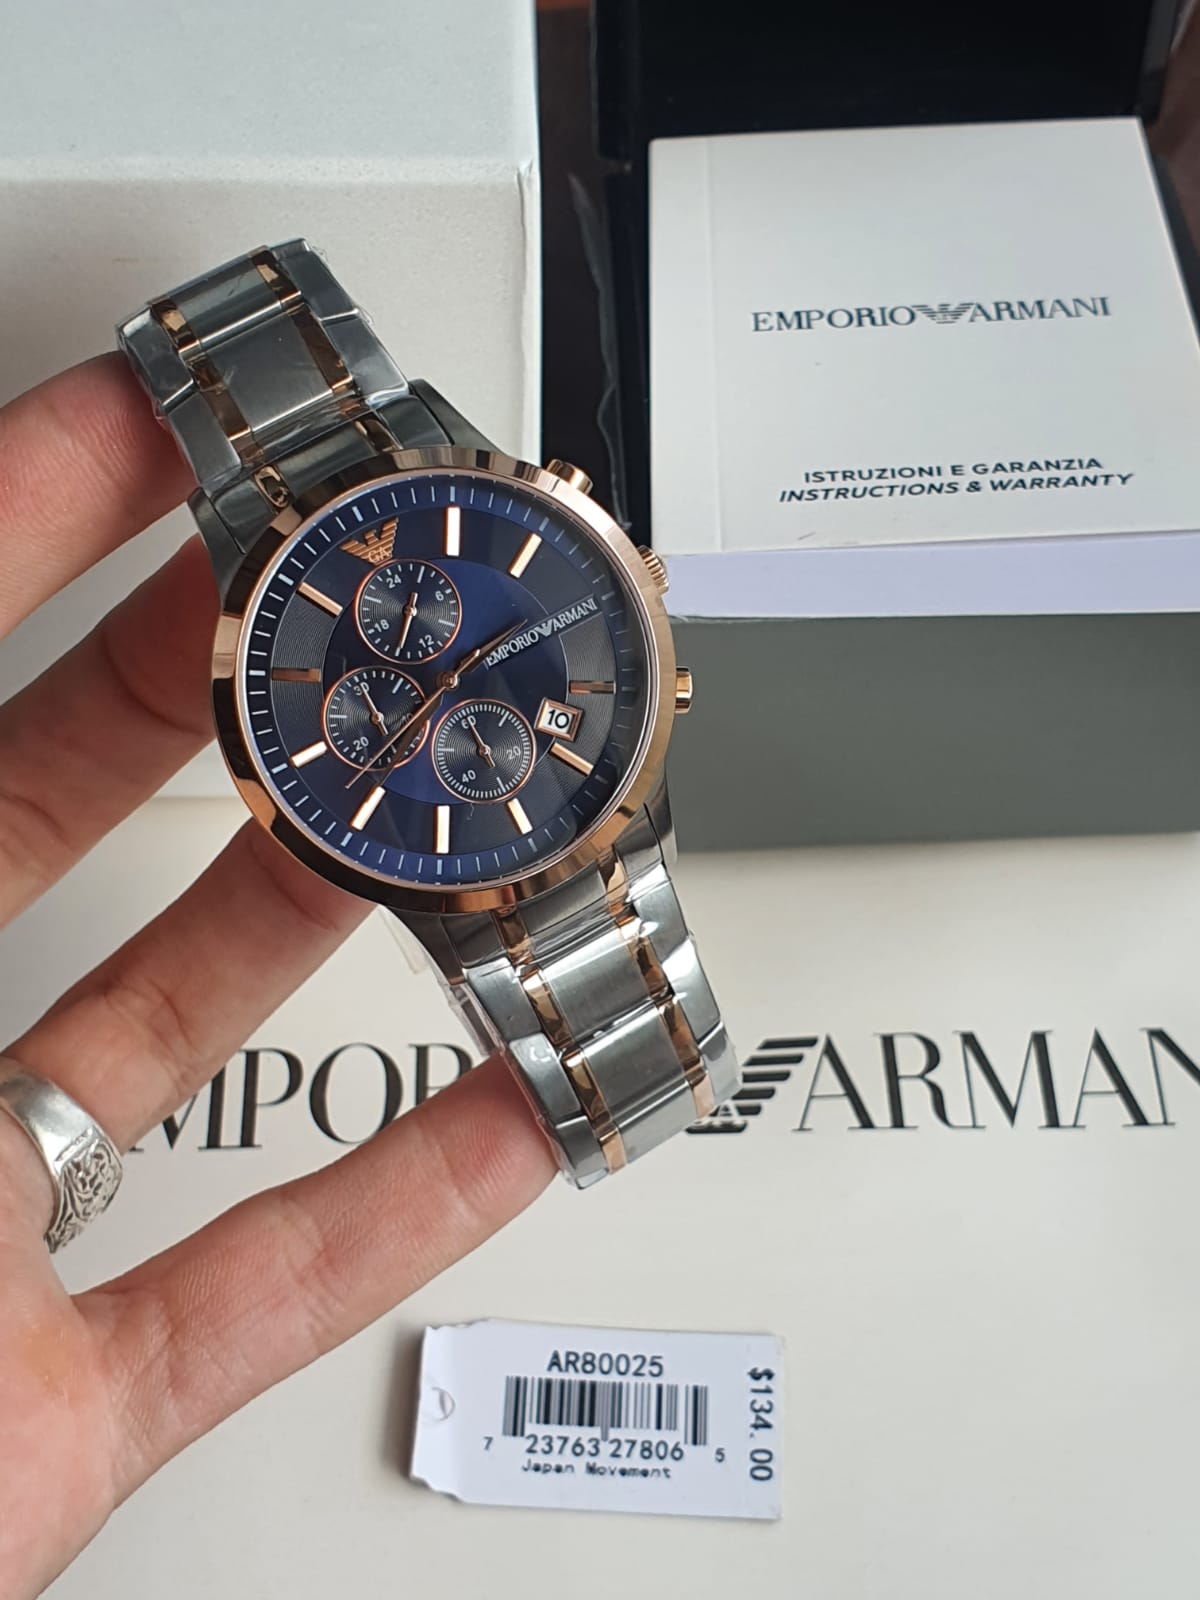 Emporio Armani Men’s Chronograph Stainless Steel 43mm Watch AR80025